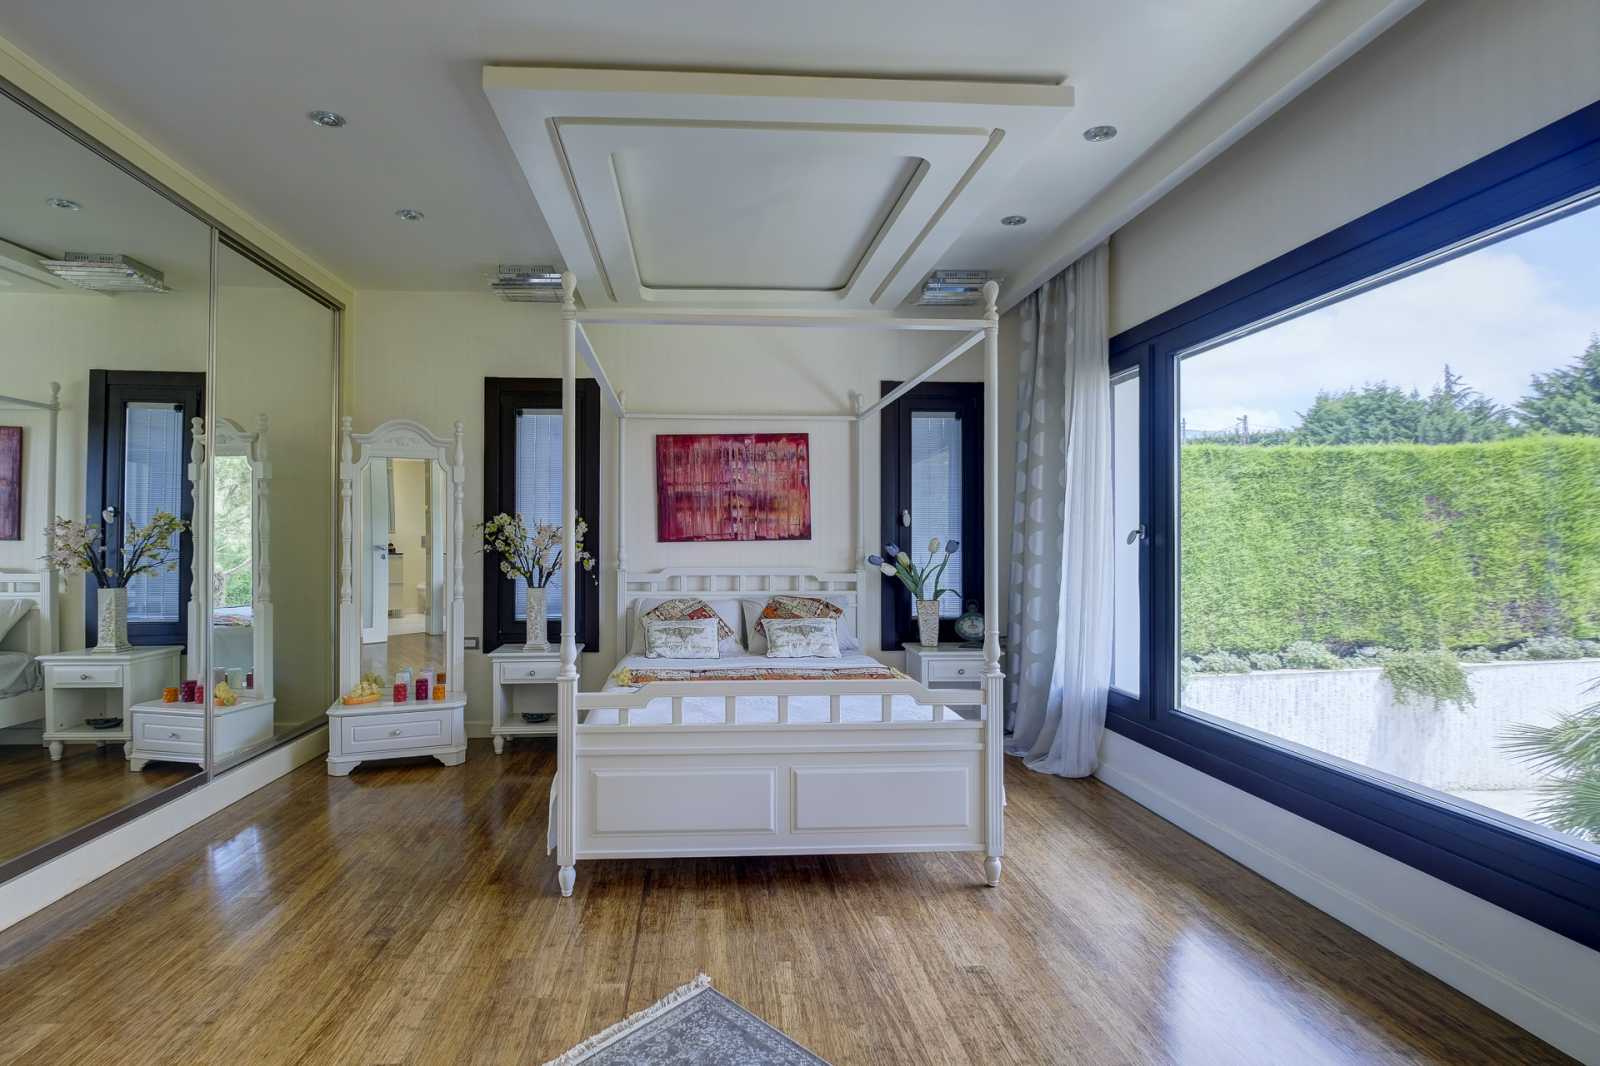 Deluxe Istanbul Spa Property For Sale 19